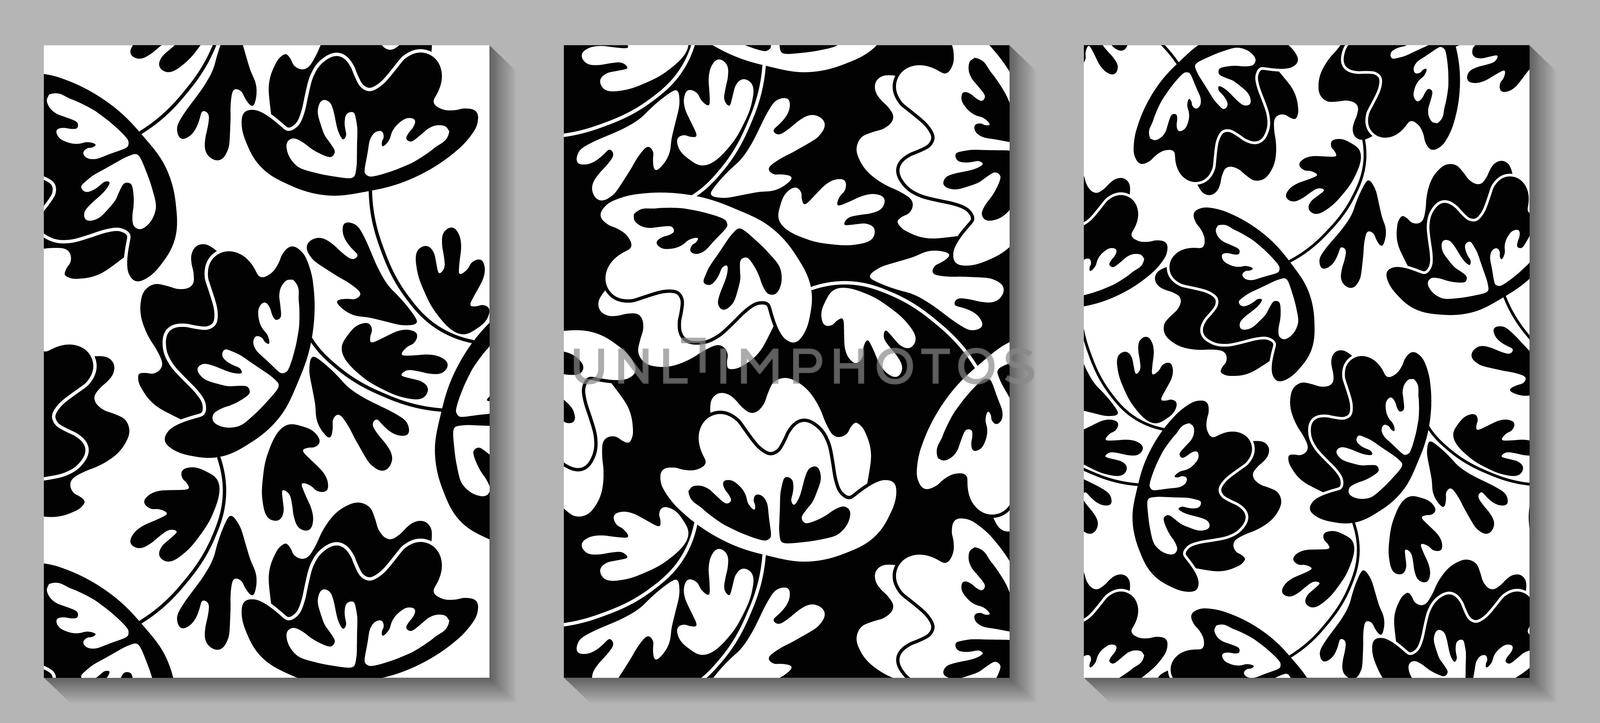 Floral web banner with traditional folk art ornament. Nature concept design. Modern floral collection of contemporary posters. Vector illustration for social media, print, postcard. Scandinavian style